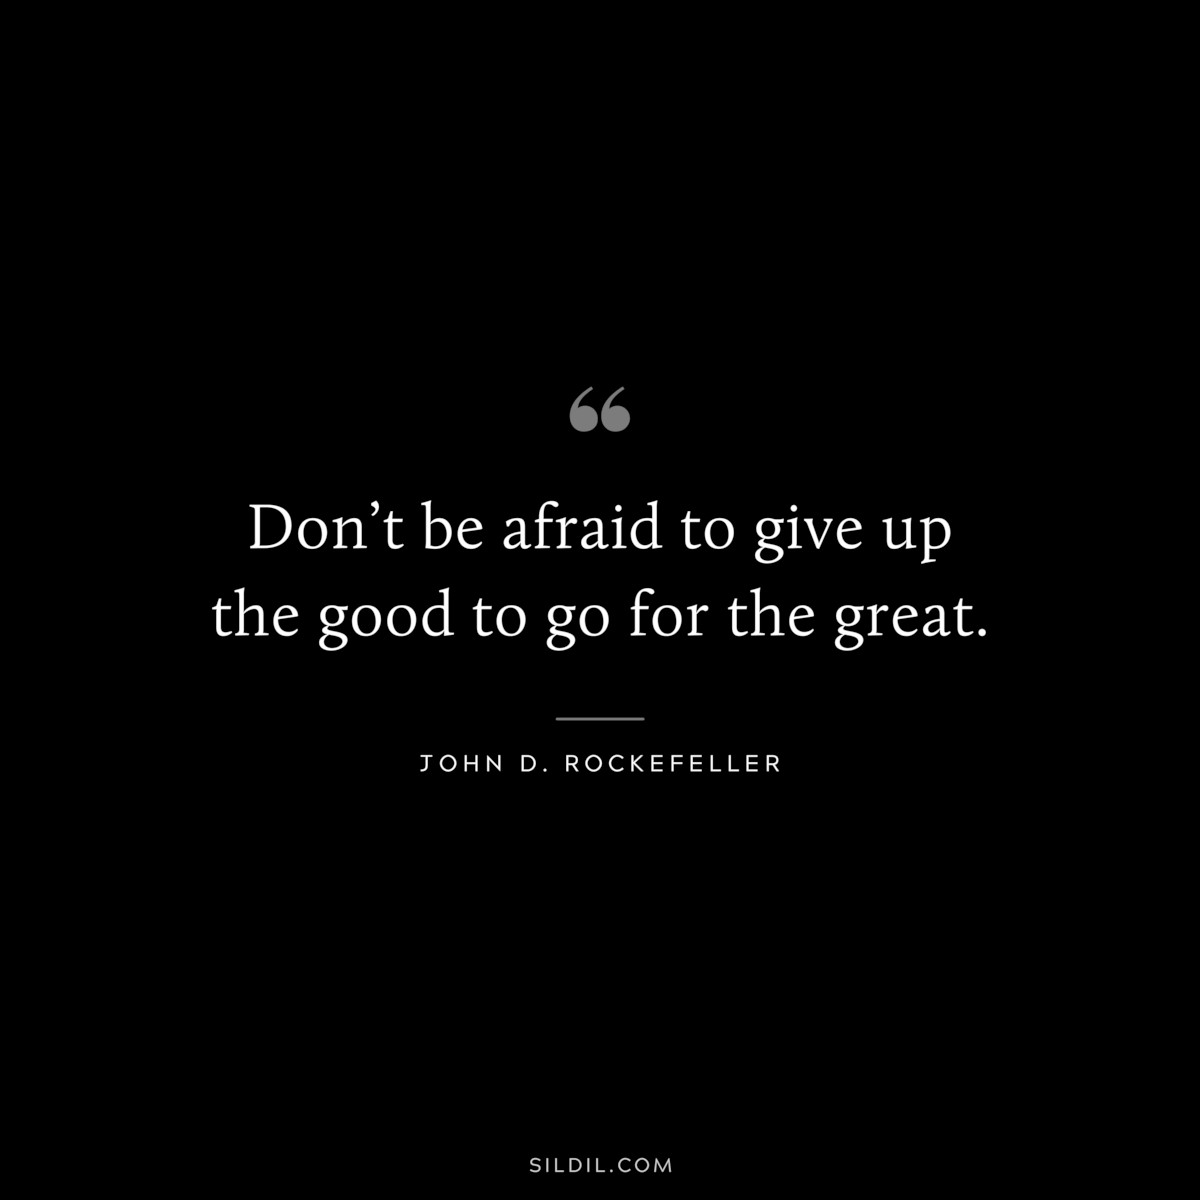 Don’t be afraid to give up the good to go for the great. ― John D. Rockefeller